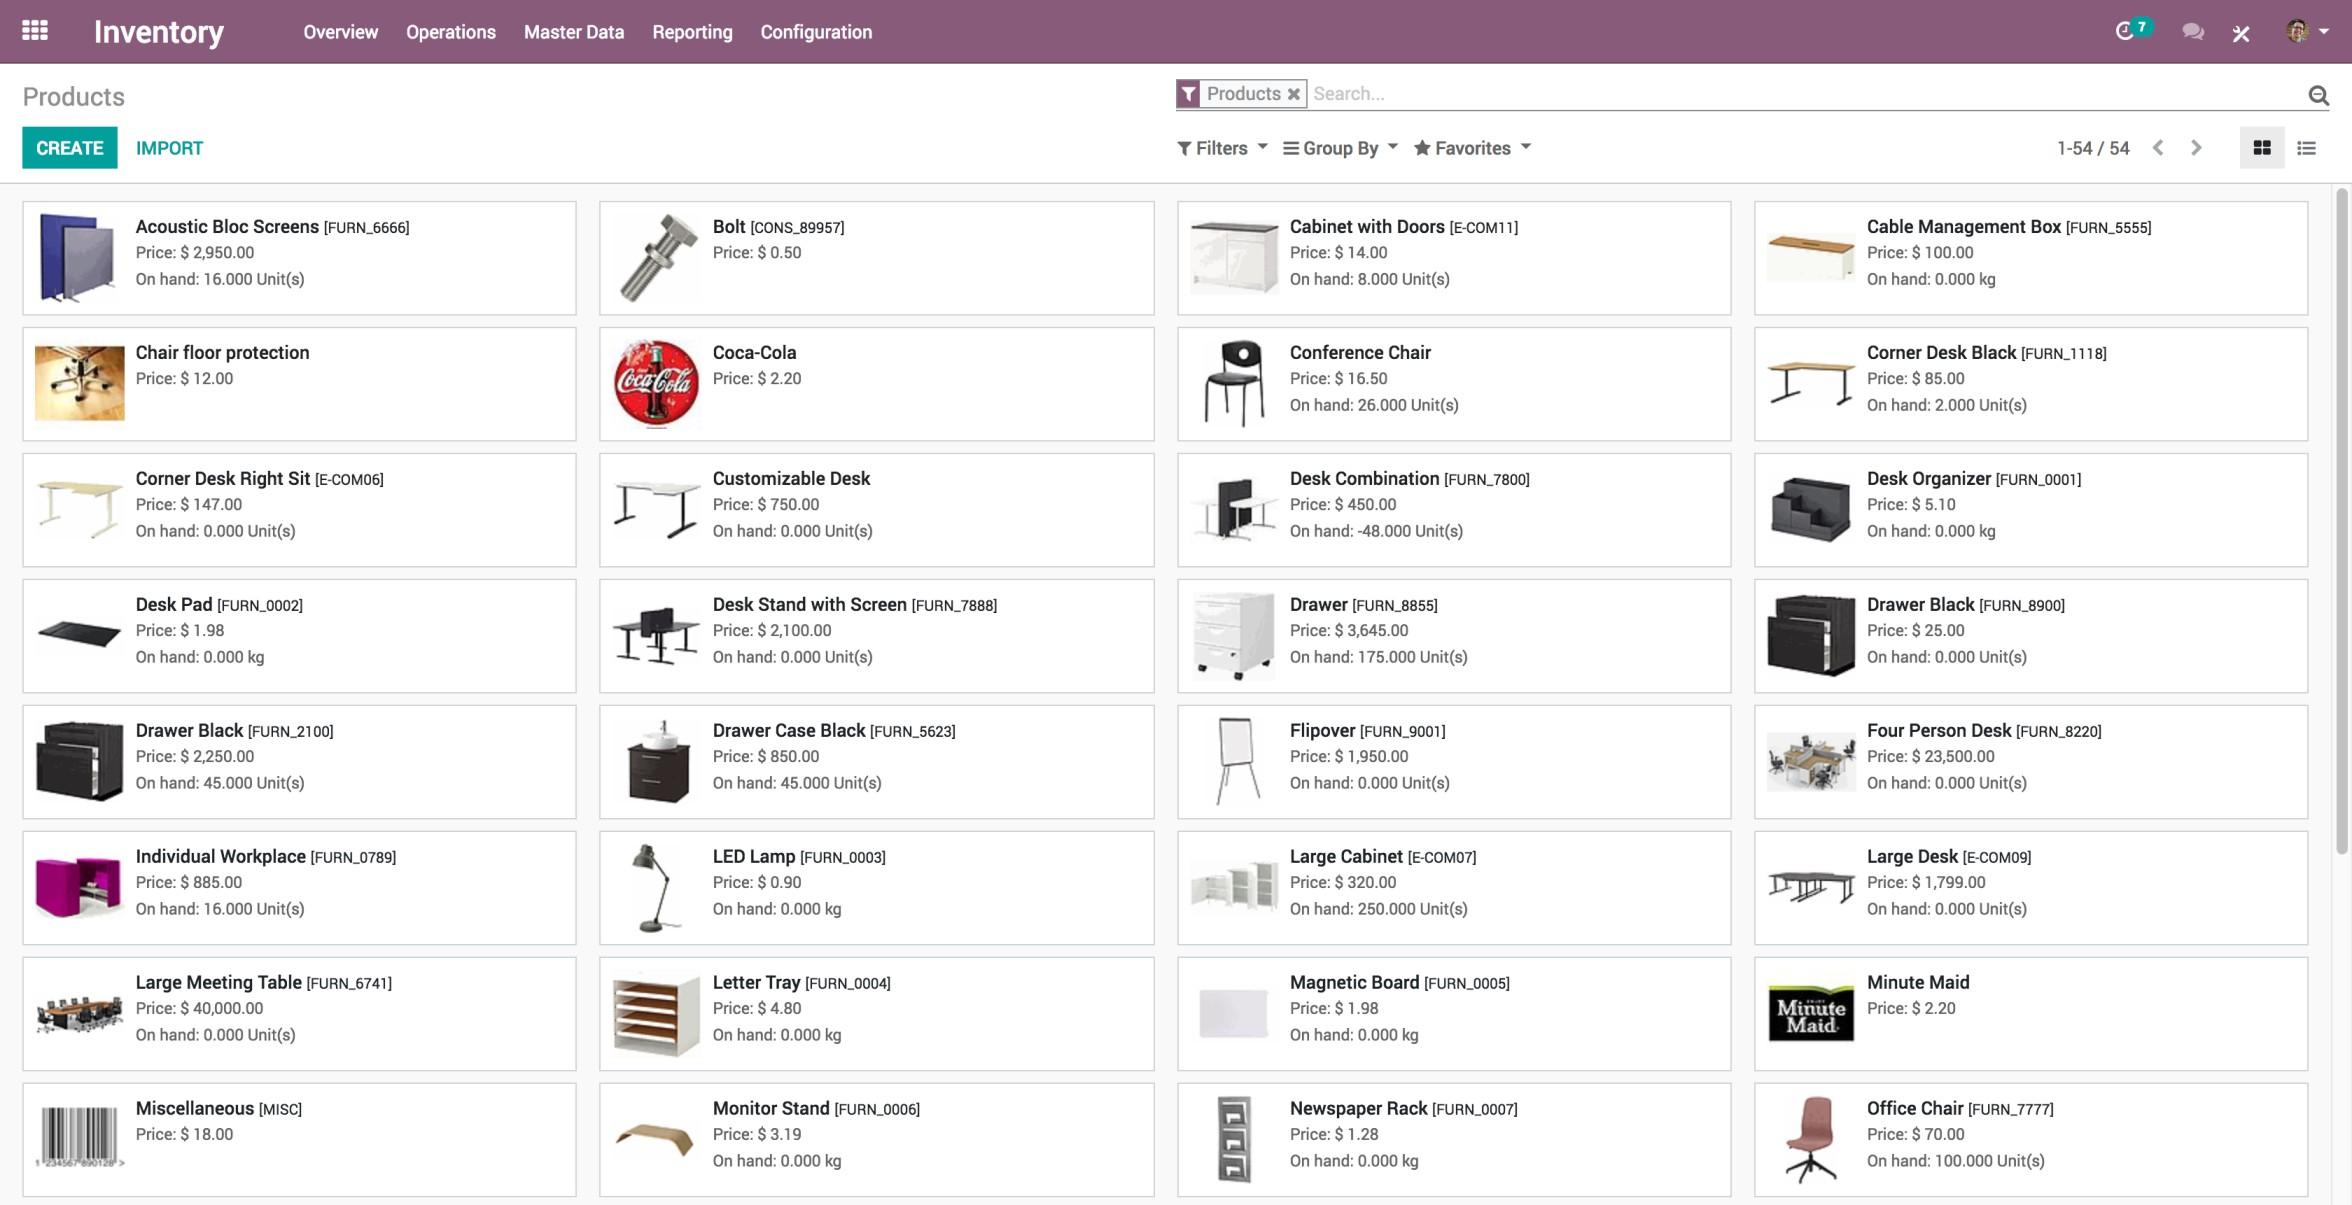 Odoo Inventory - Products List